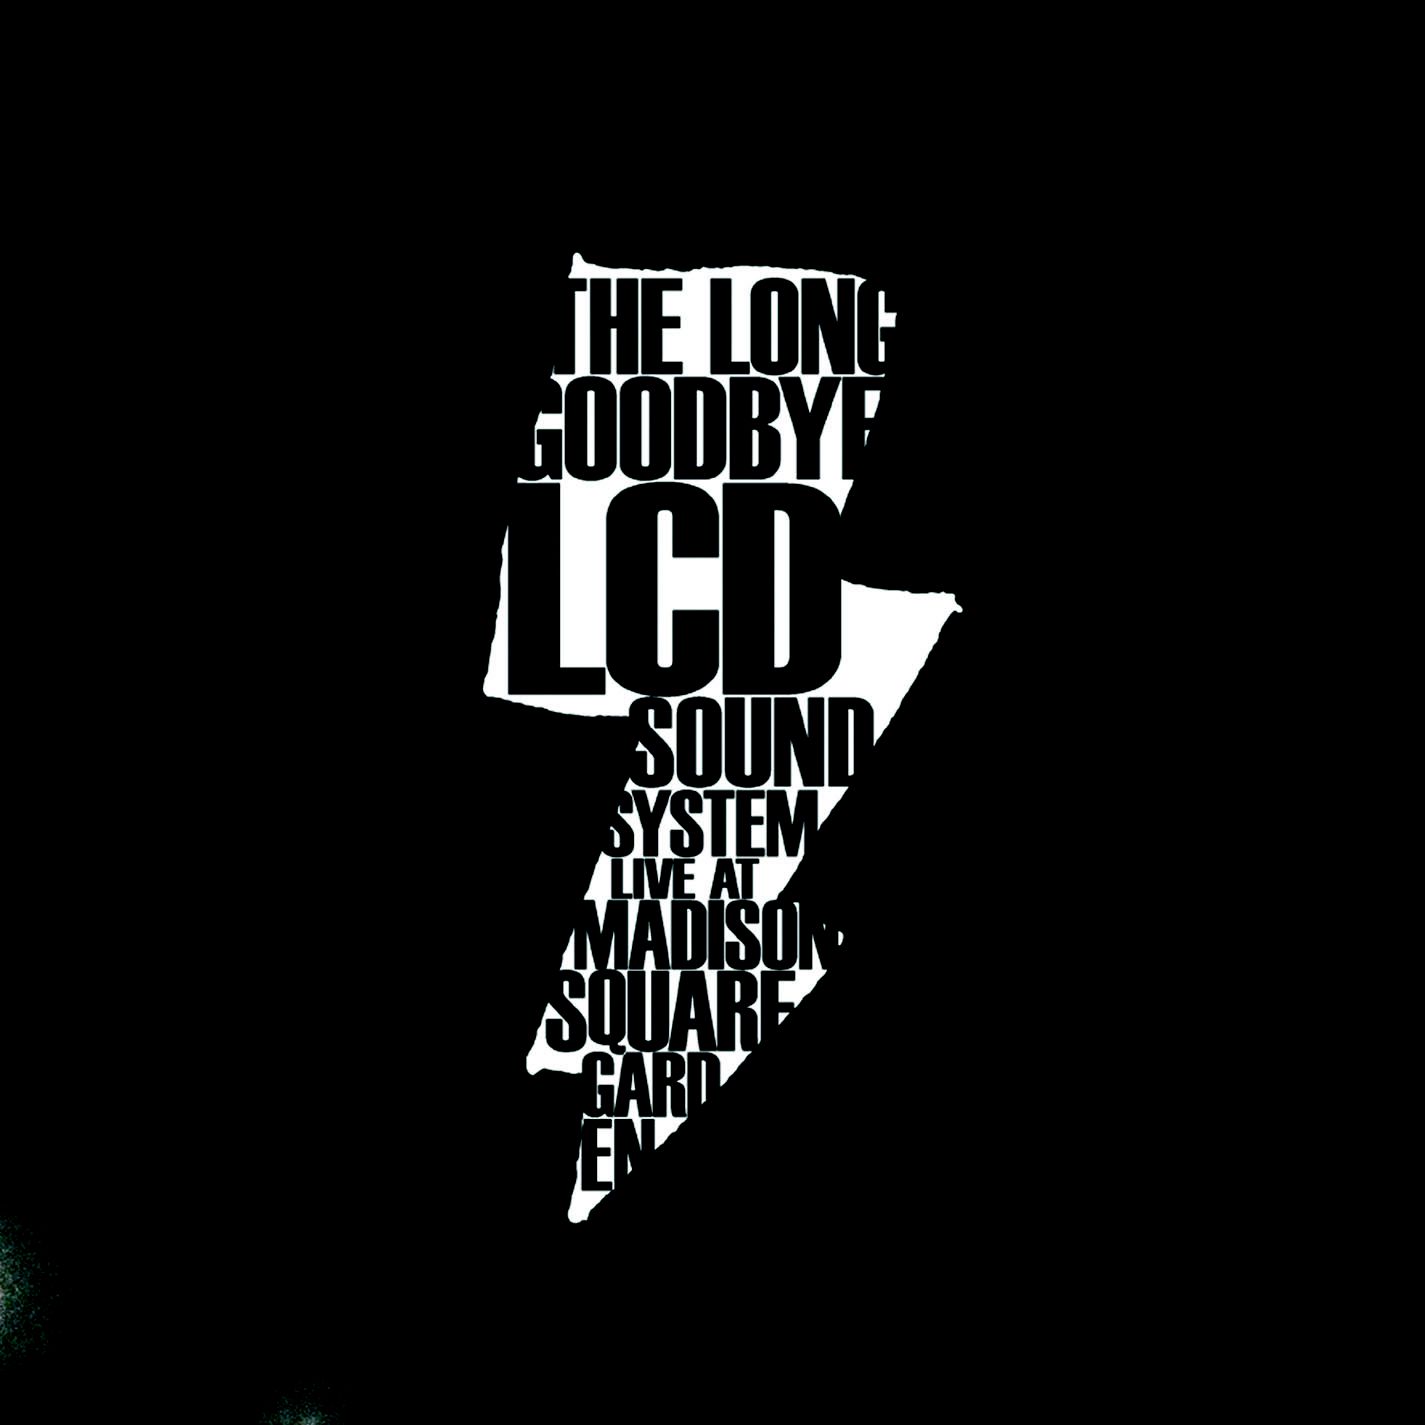 The_Long_Goodbye_LCD_Soundsystem_Live_At_Madison_Square_Gard_Live